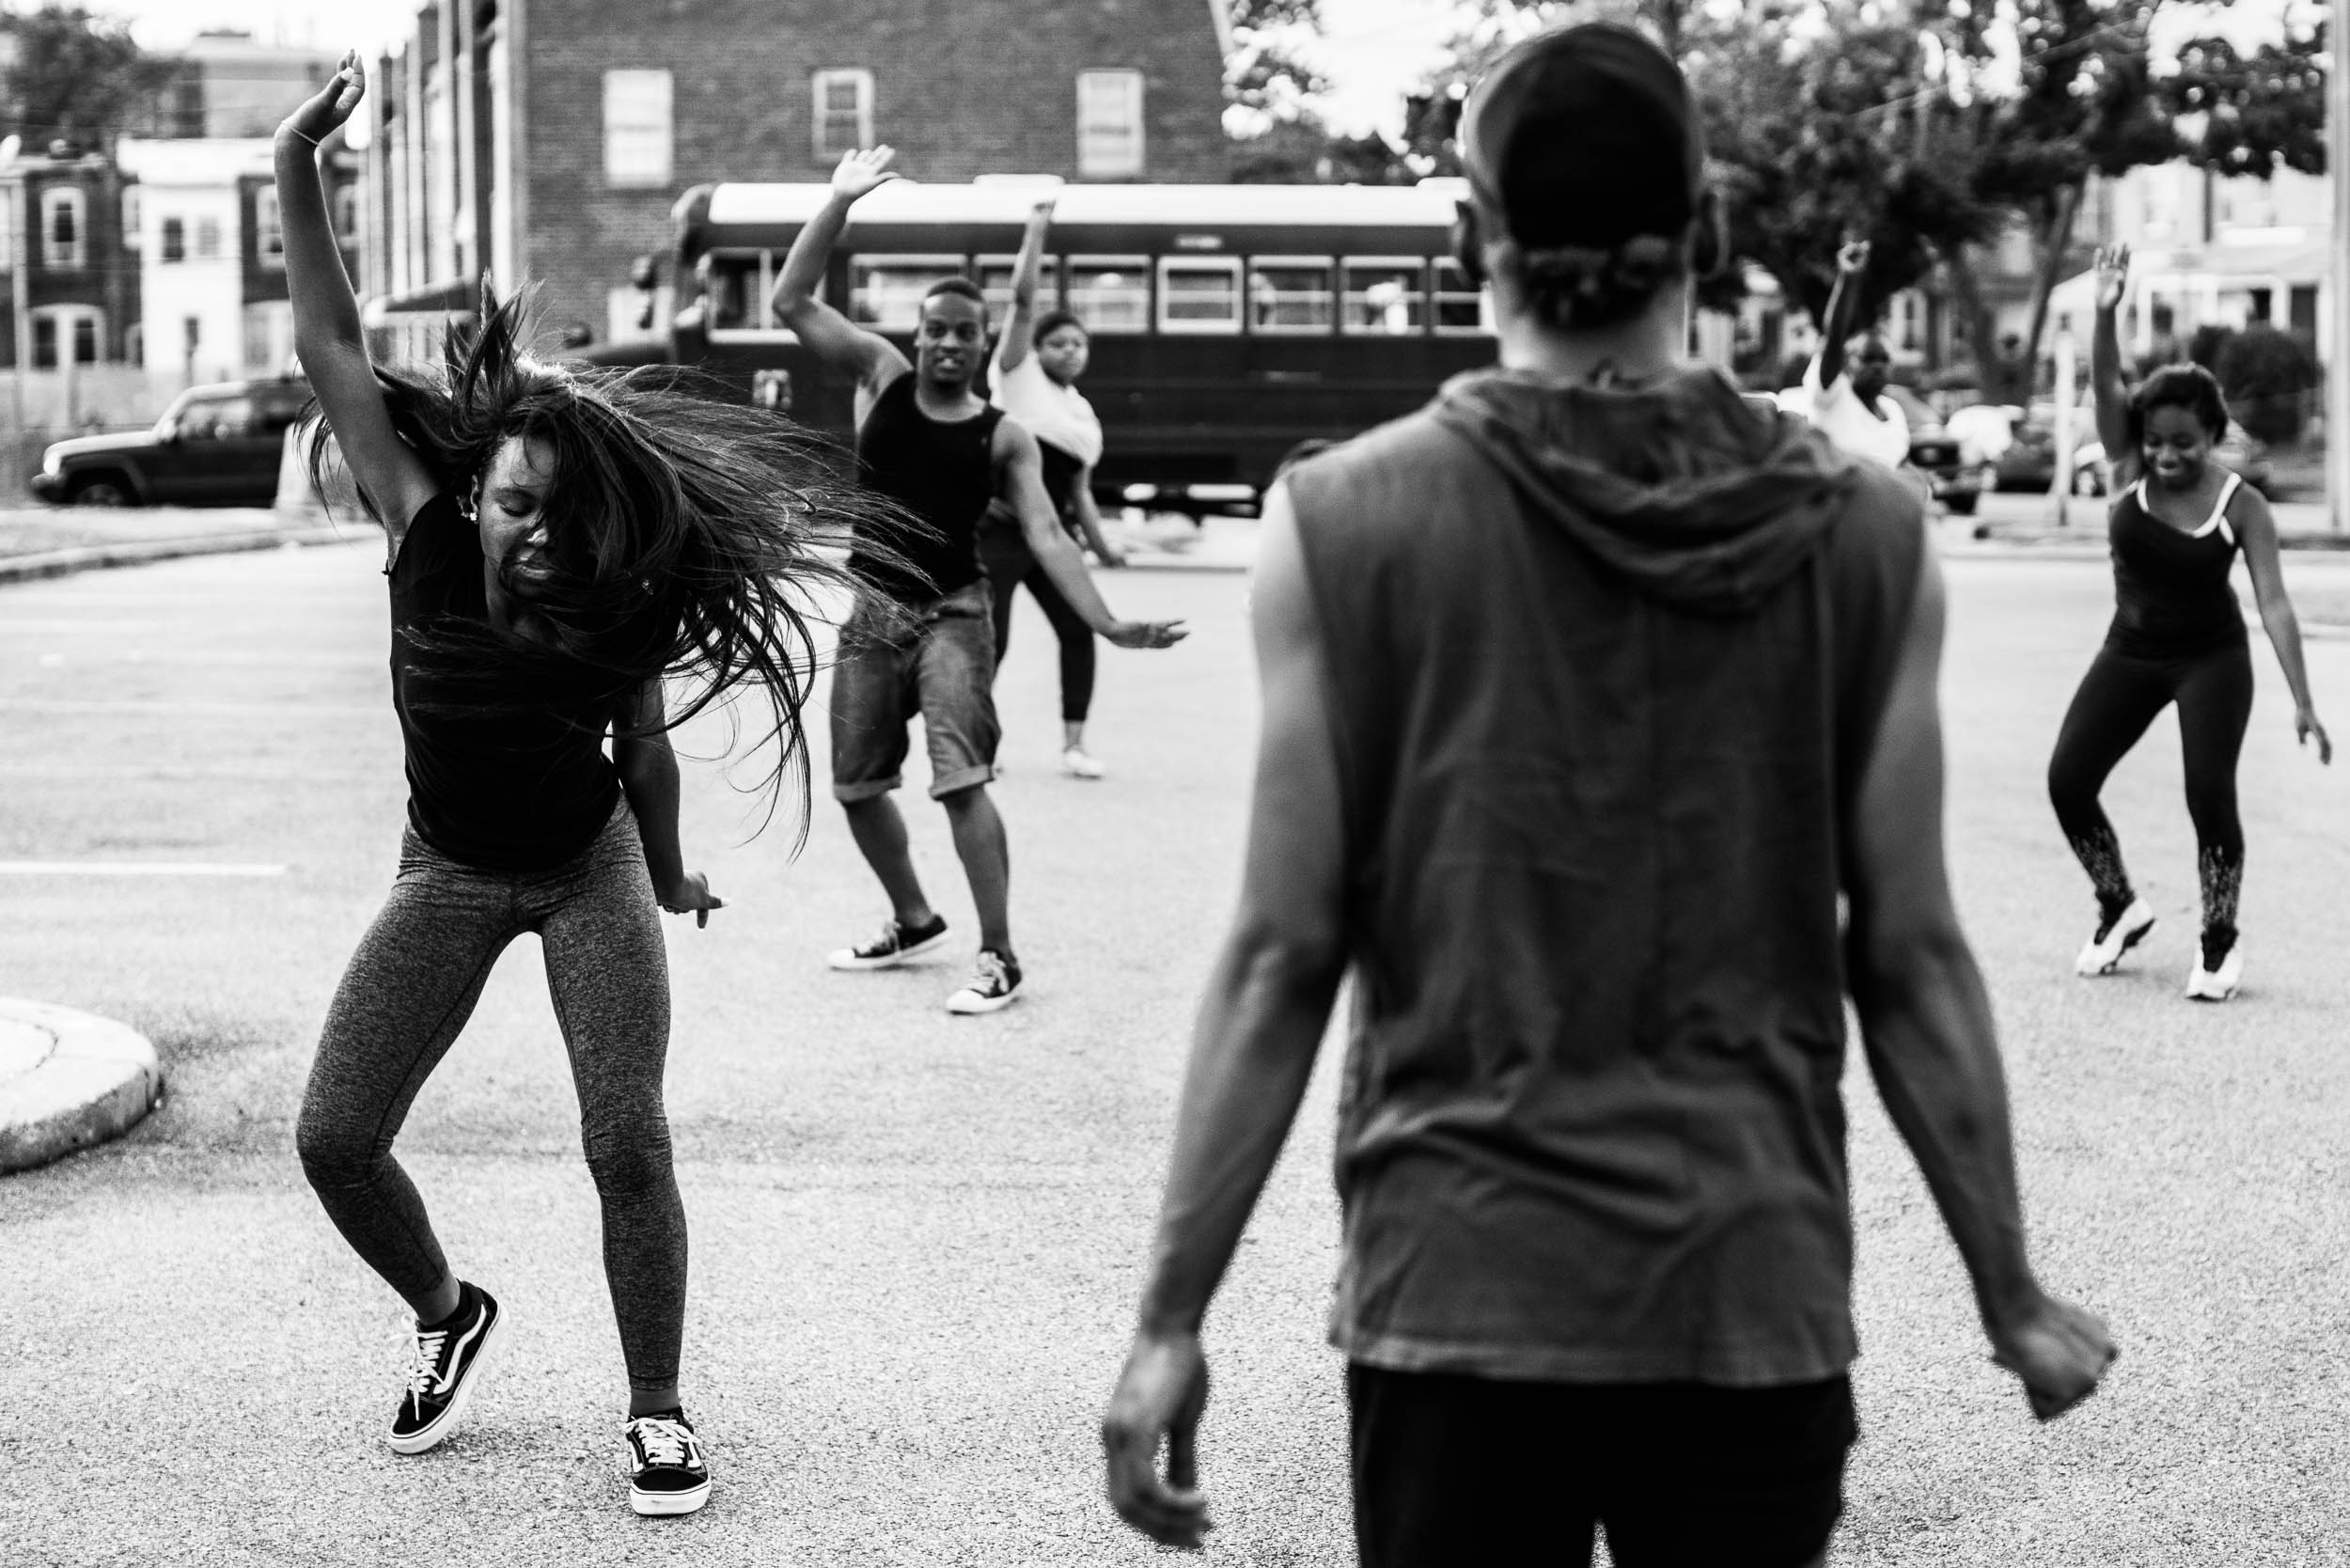 YOUTH URBAN BLACK CULTURE PHOTOGRAPHY ON HBCU STEP SQUAD MARCHING DANCE UNIT REPORTAGE PHOTOGRAPHER IN WASHINGTON DC NEW YORK LOS ANGELES 